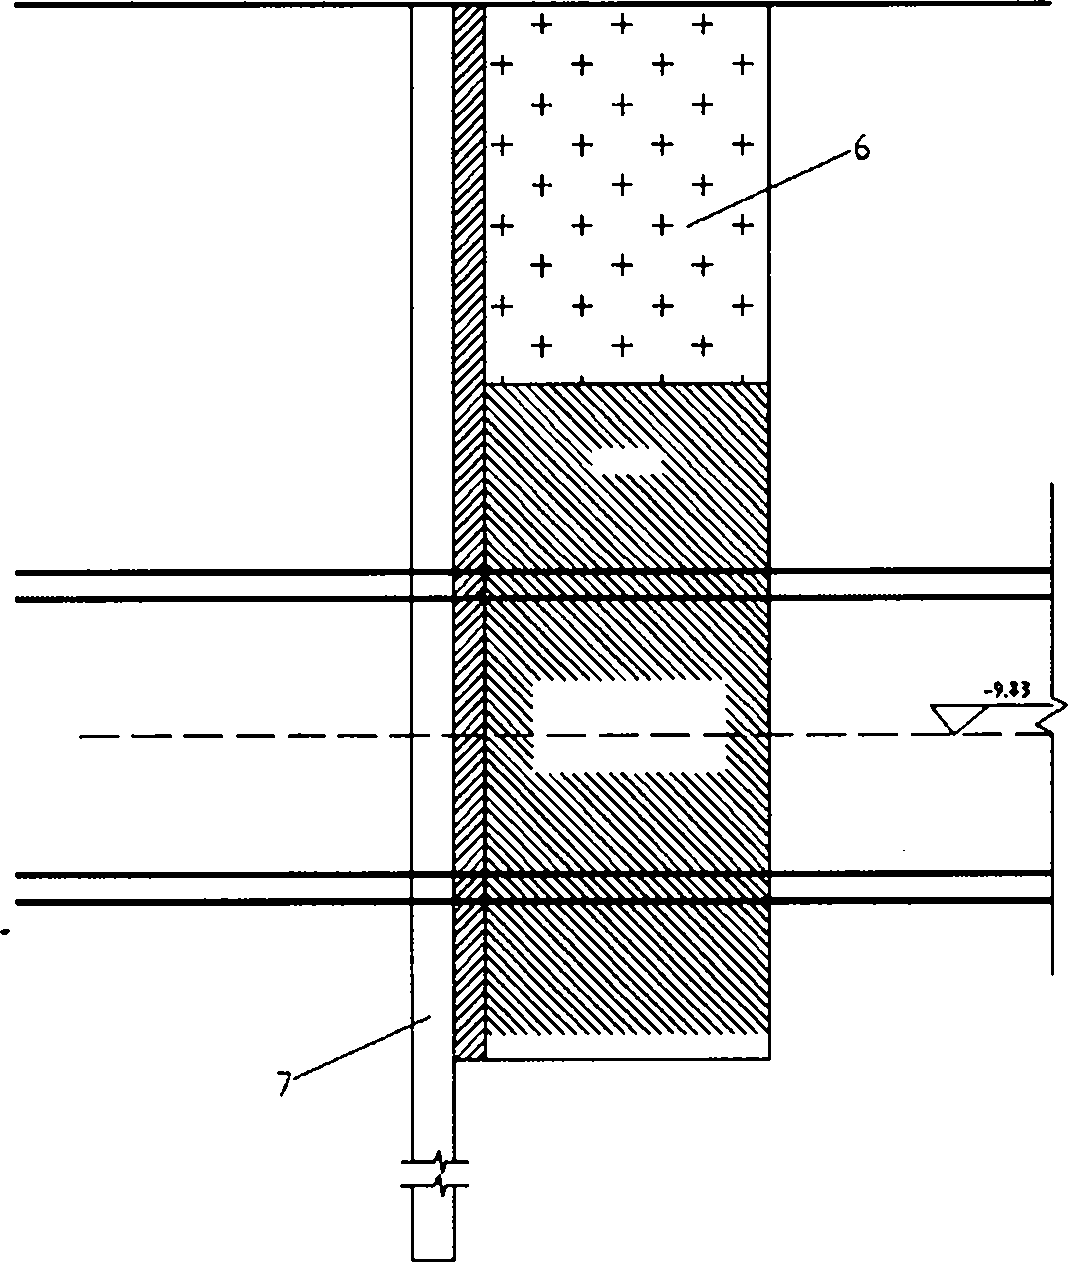 Construction method for shield entry under complicated working conditions